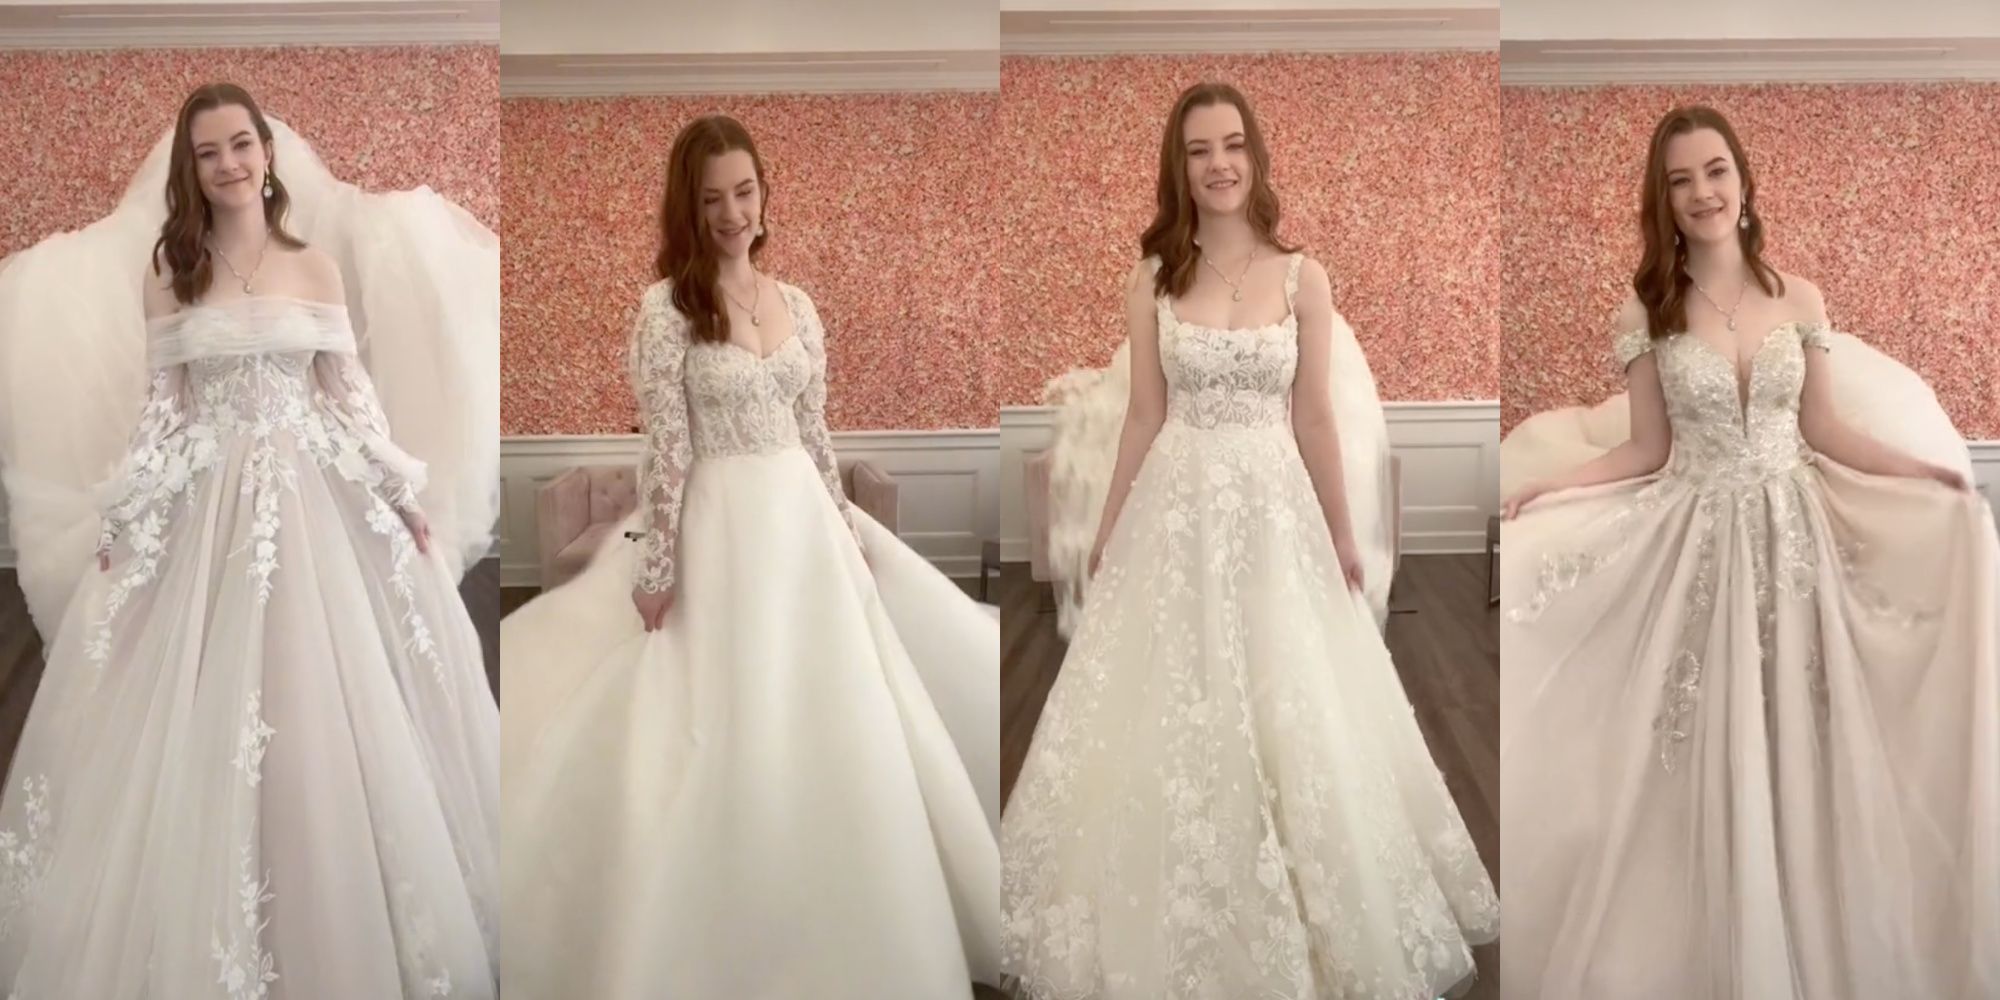 Wedding gowns inspired by Outlander on TikTok